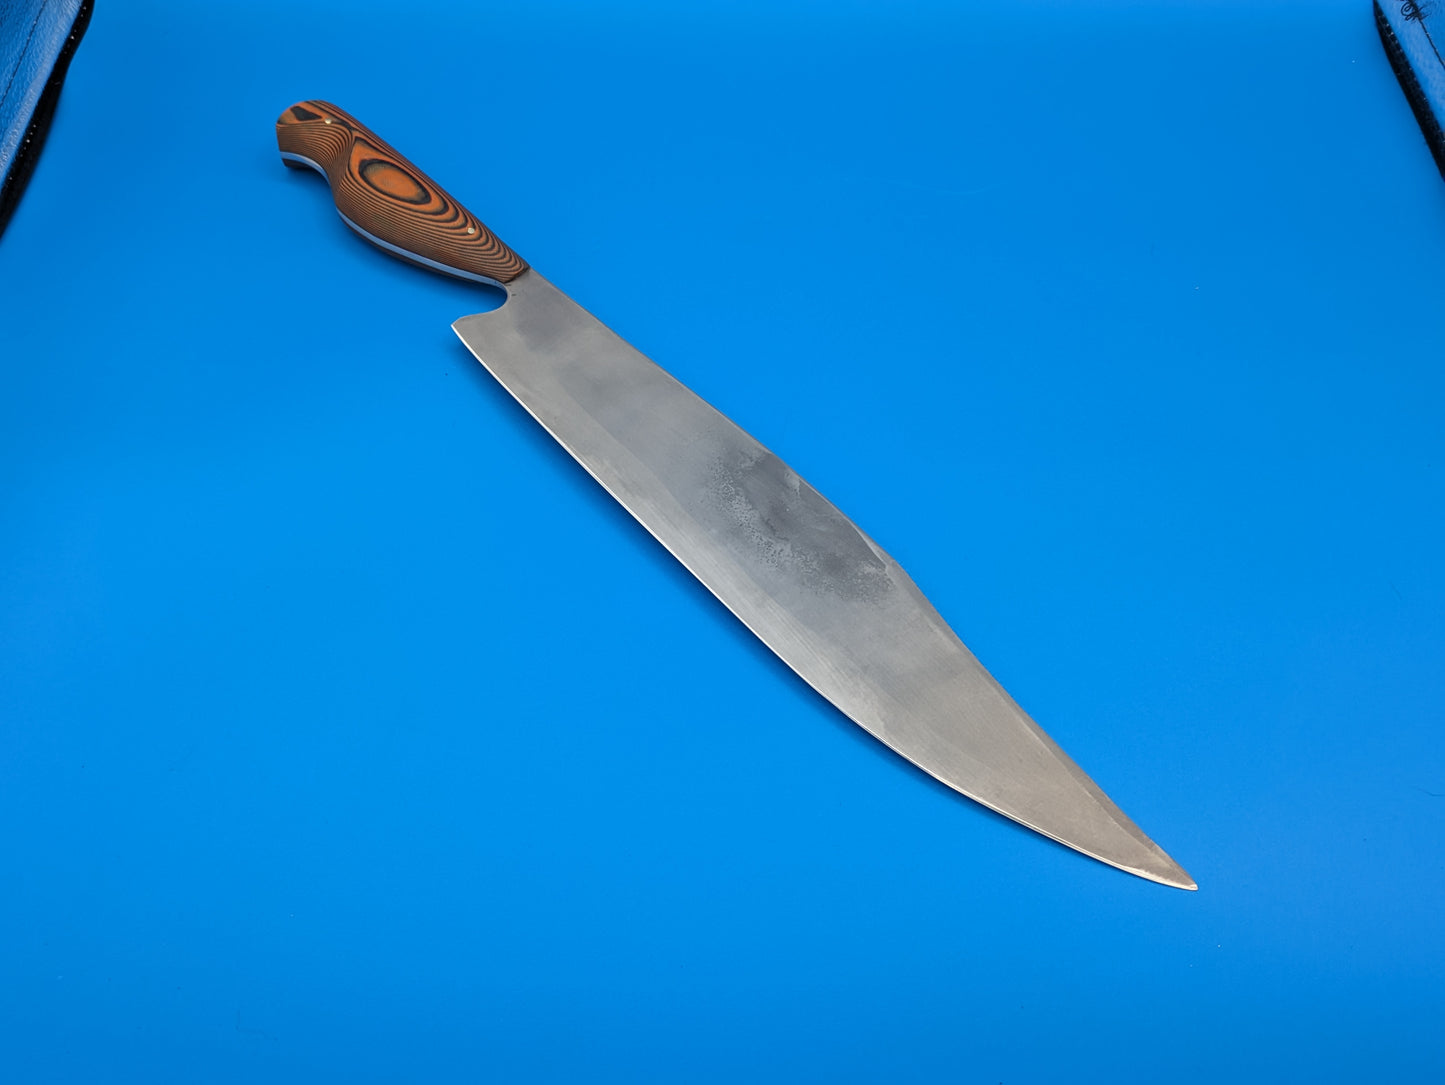 Stainless Steel Hmong/Bowie Knife